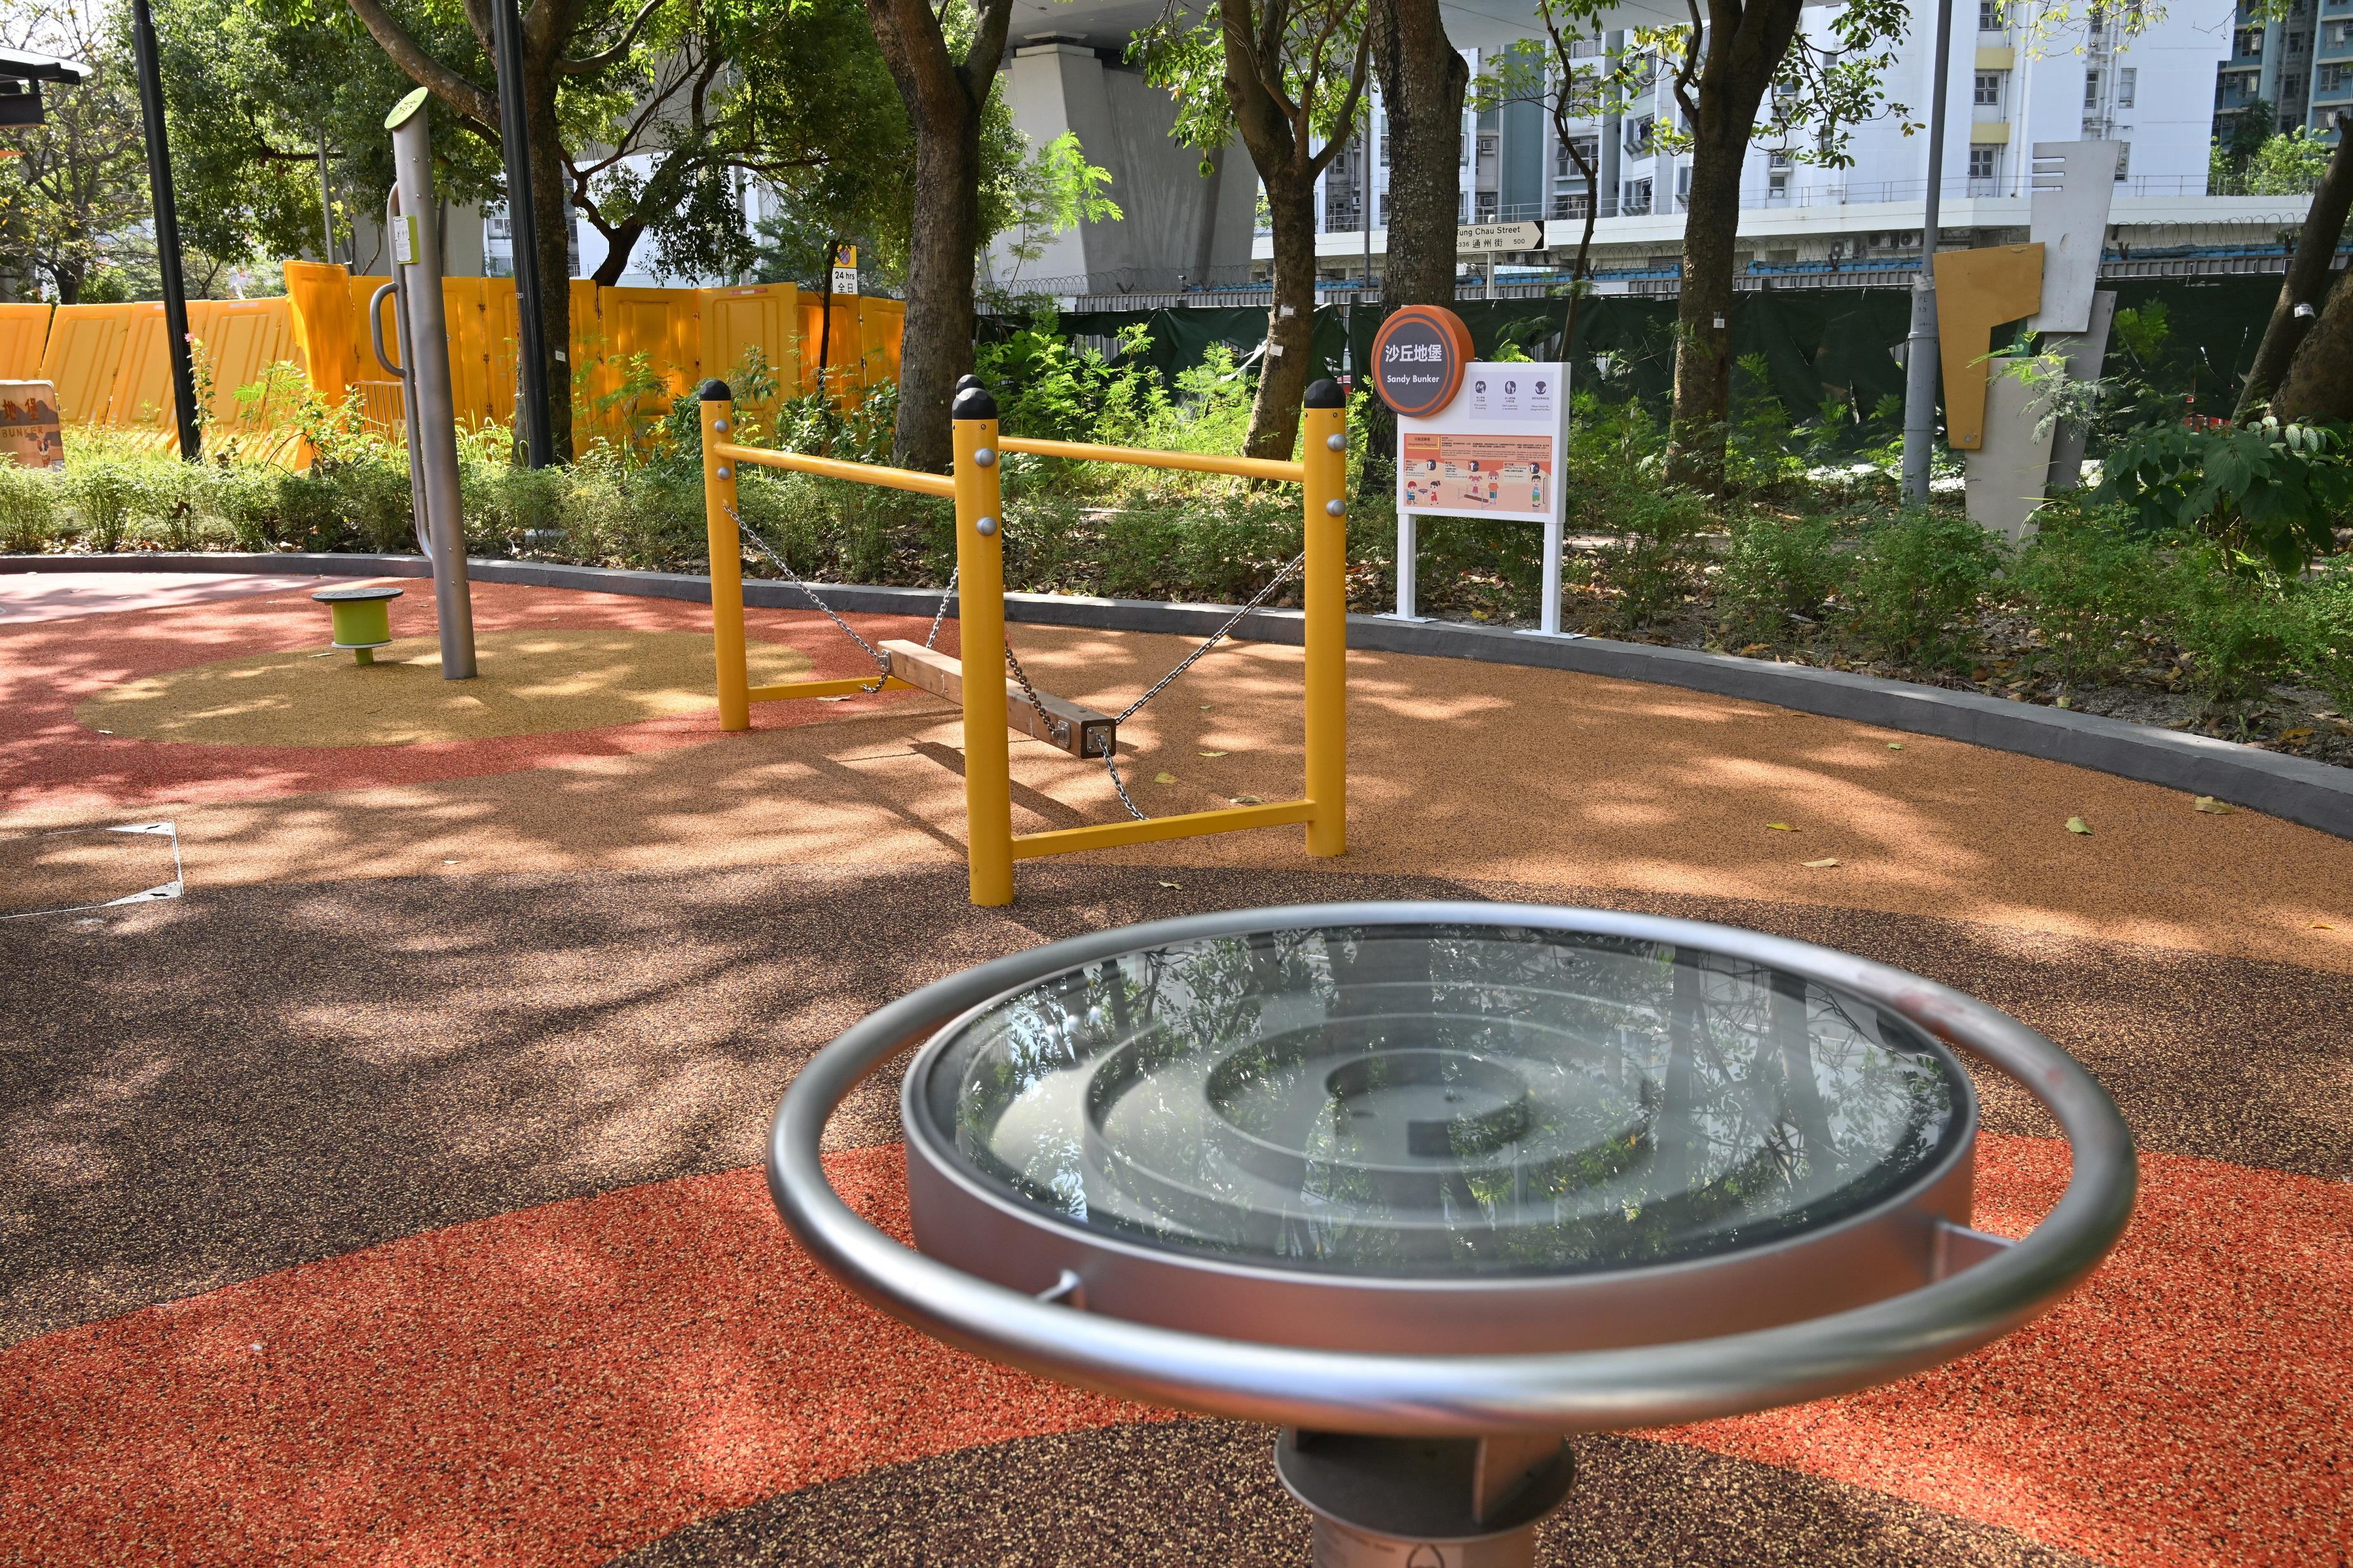 The newly built inclusive playground in Sham Shui Po Park is open for public use from today (November 26). The design of the playground adopts "nature" as its theme, with "sand", "plants" and "water" as the main design elements. There are three themed areas in the playground, namely "Sandy Bunker", "Jungle Meadow", and "Oasis Spring". Photo shows the "Sandy Bunker" themed area.

